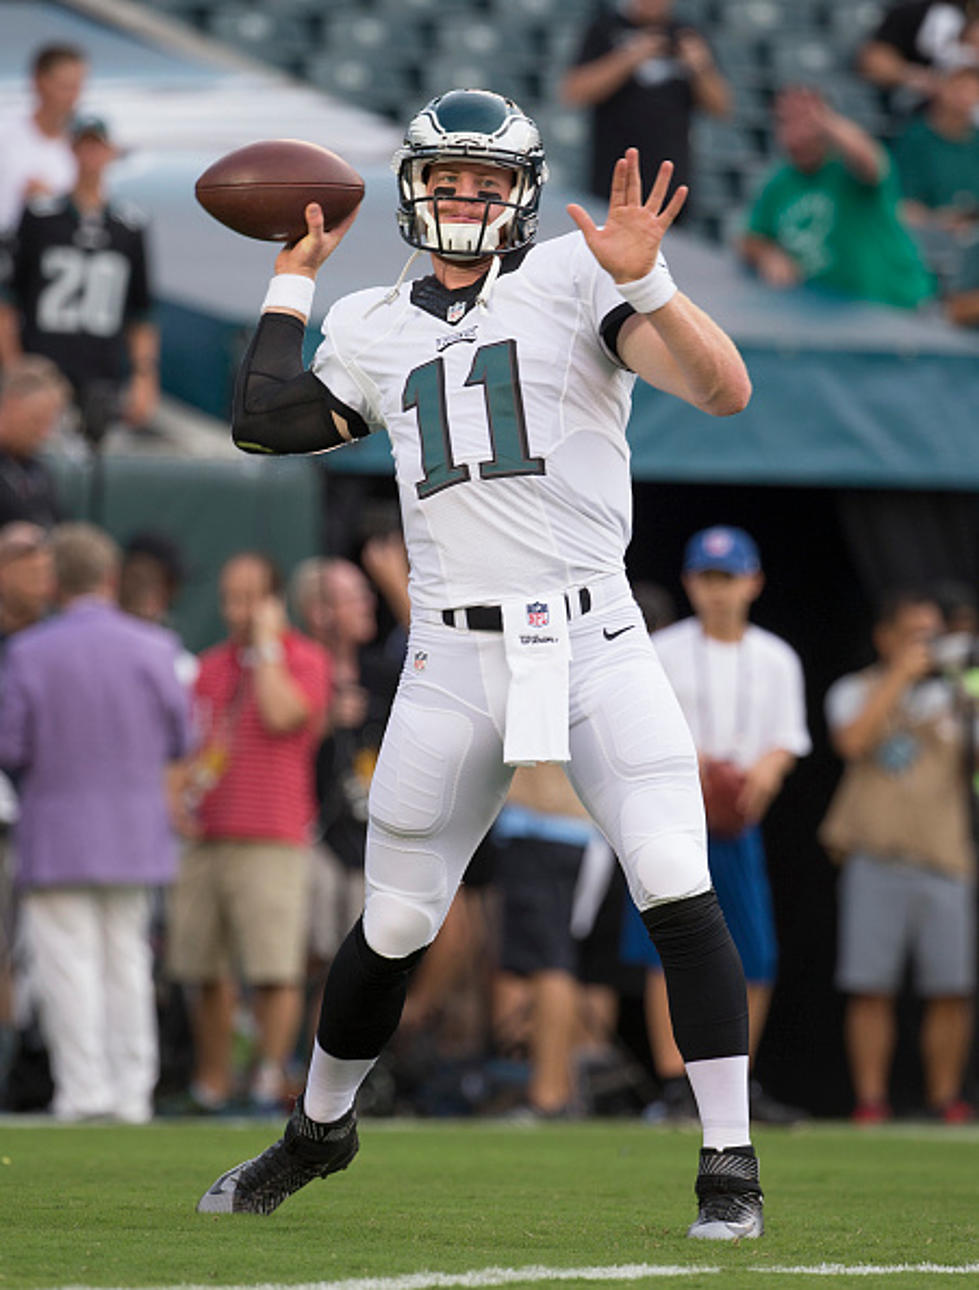 Evans: Wentz Saw The Field Extremely Well